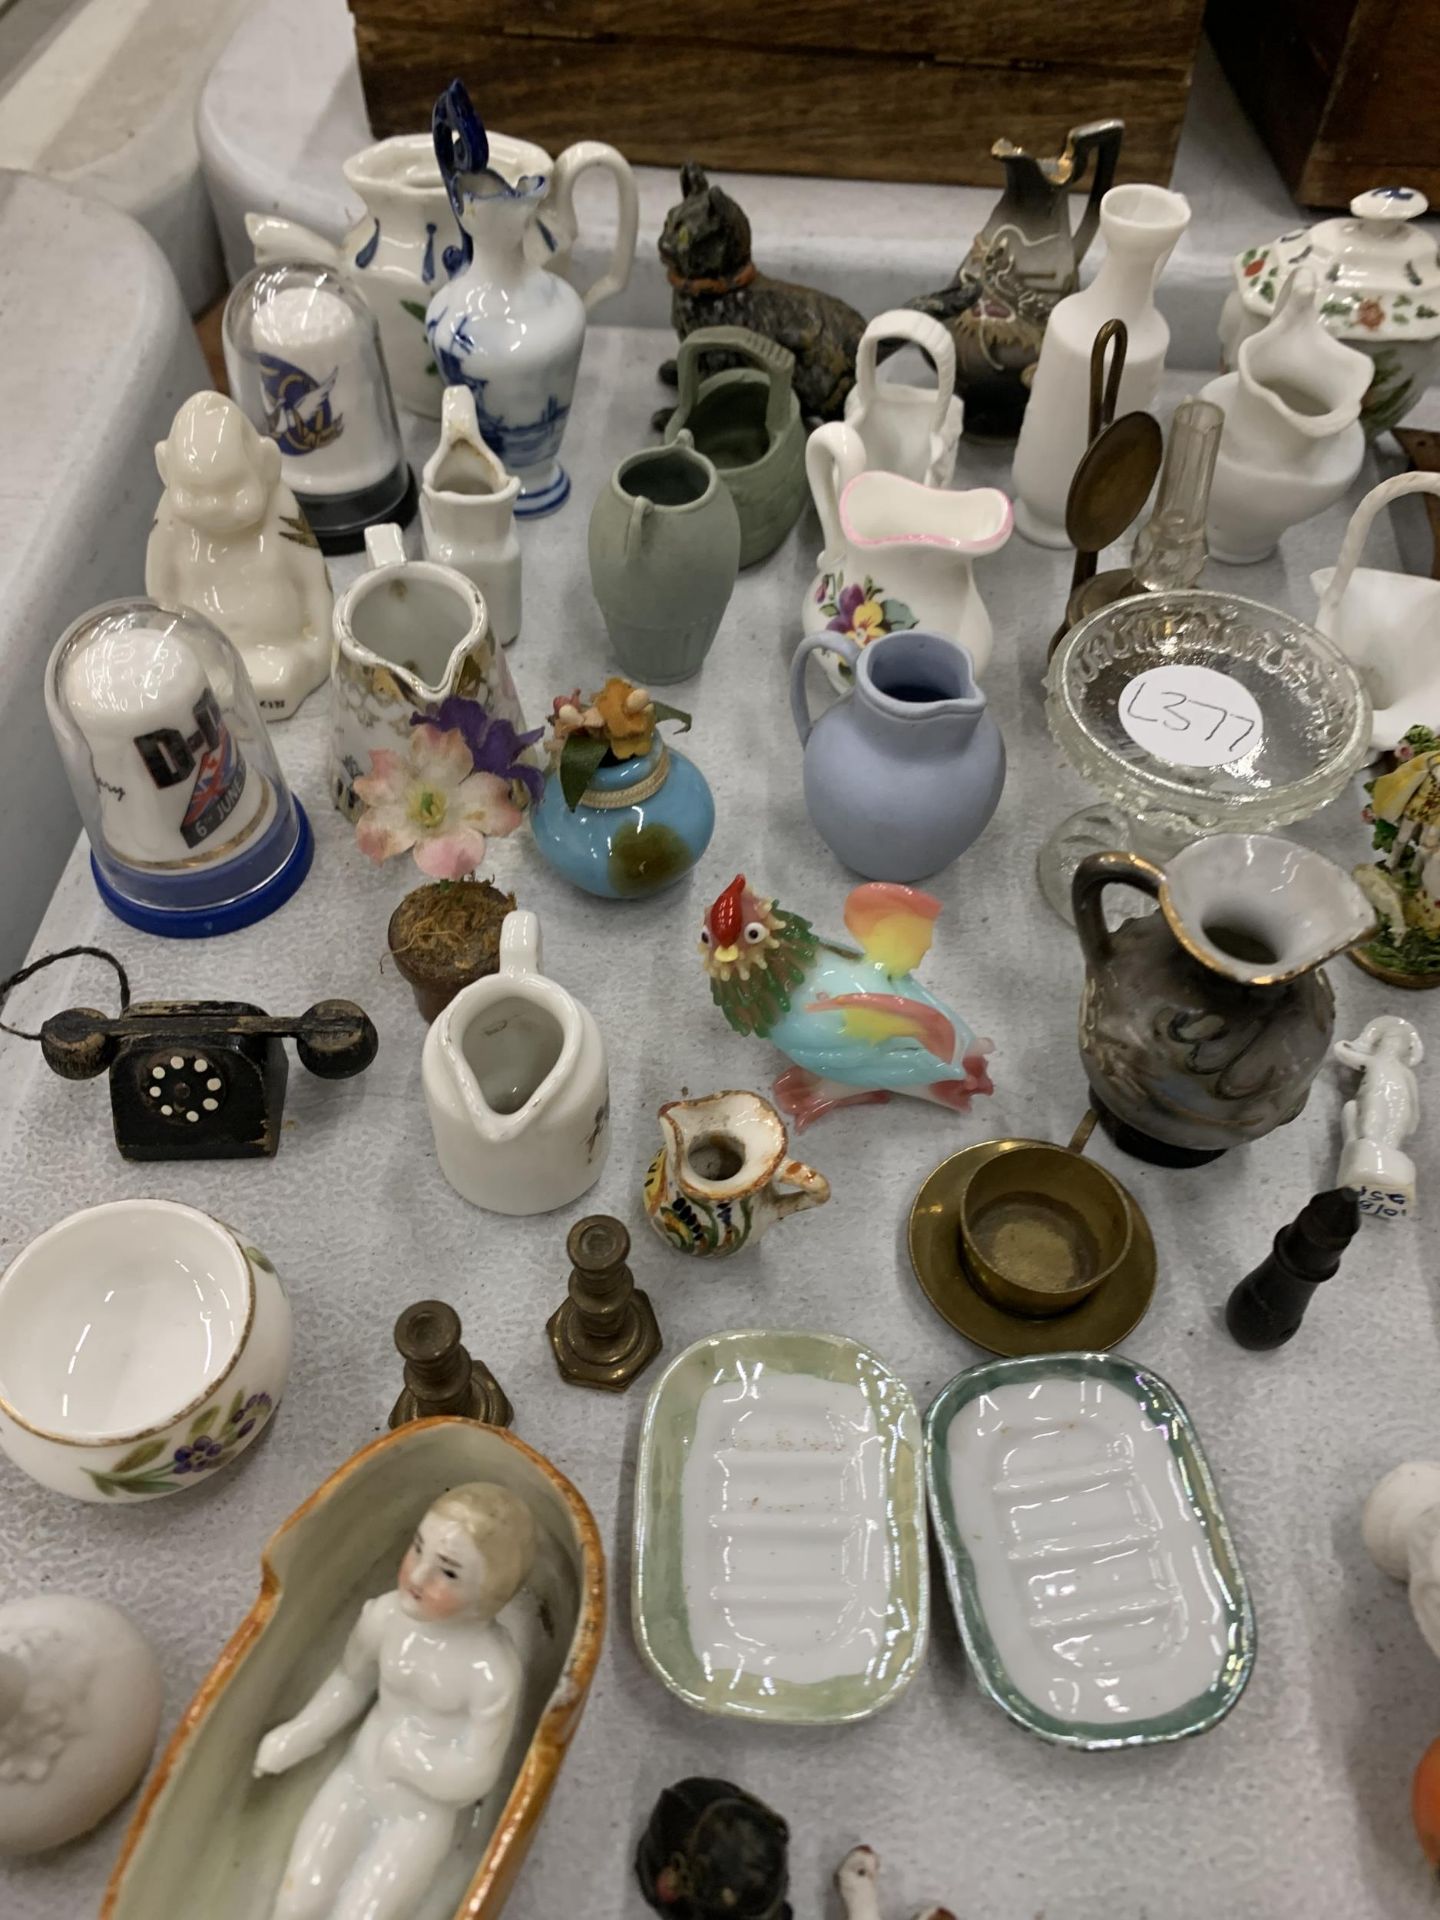 A LARGE QUANTITY OF MINIATURE ITEMS TO INCLUDE JUGS, POTS, ANIMALS, PLATES, ETC - Image 3 of 4